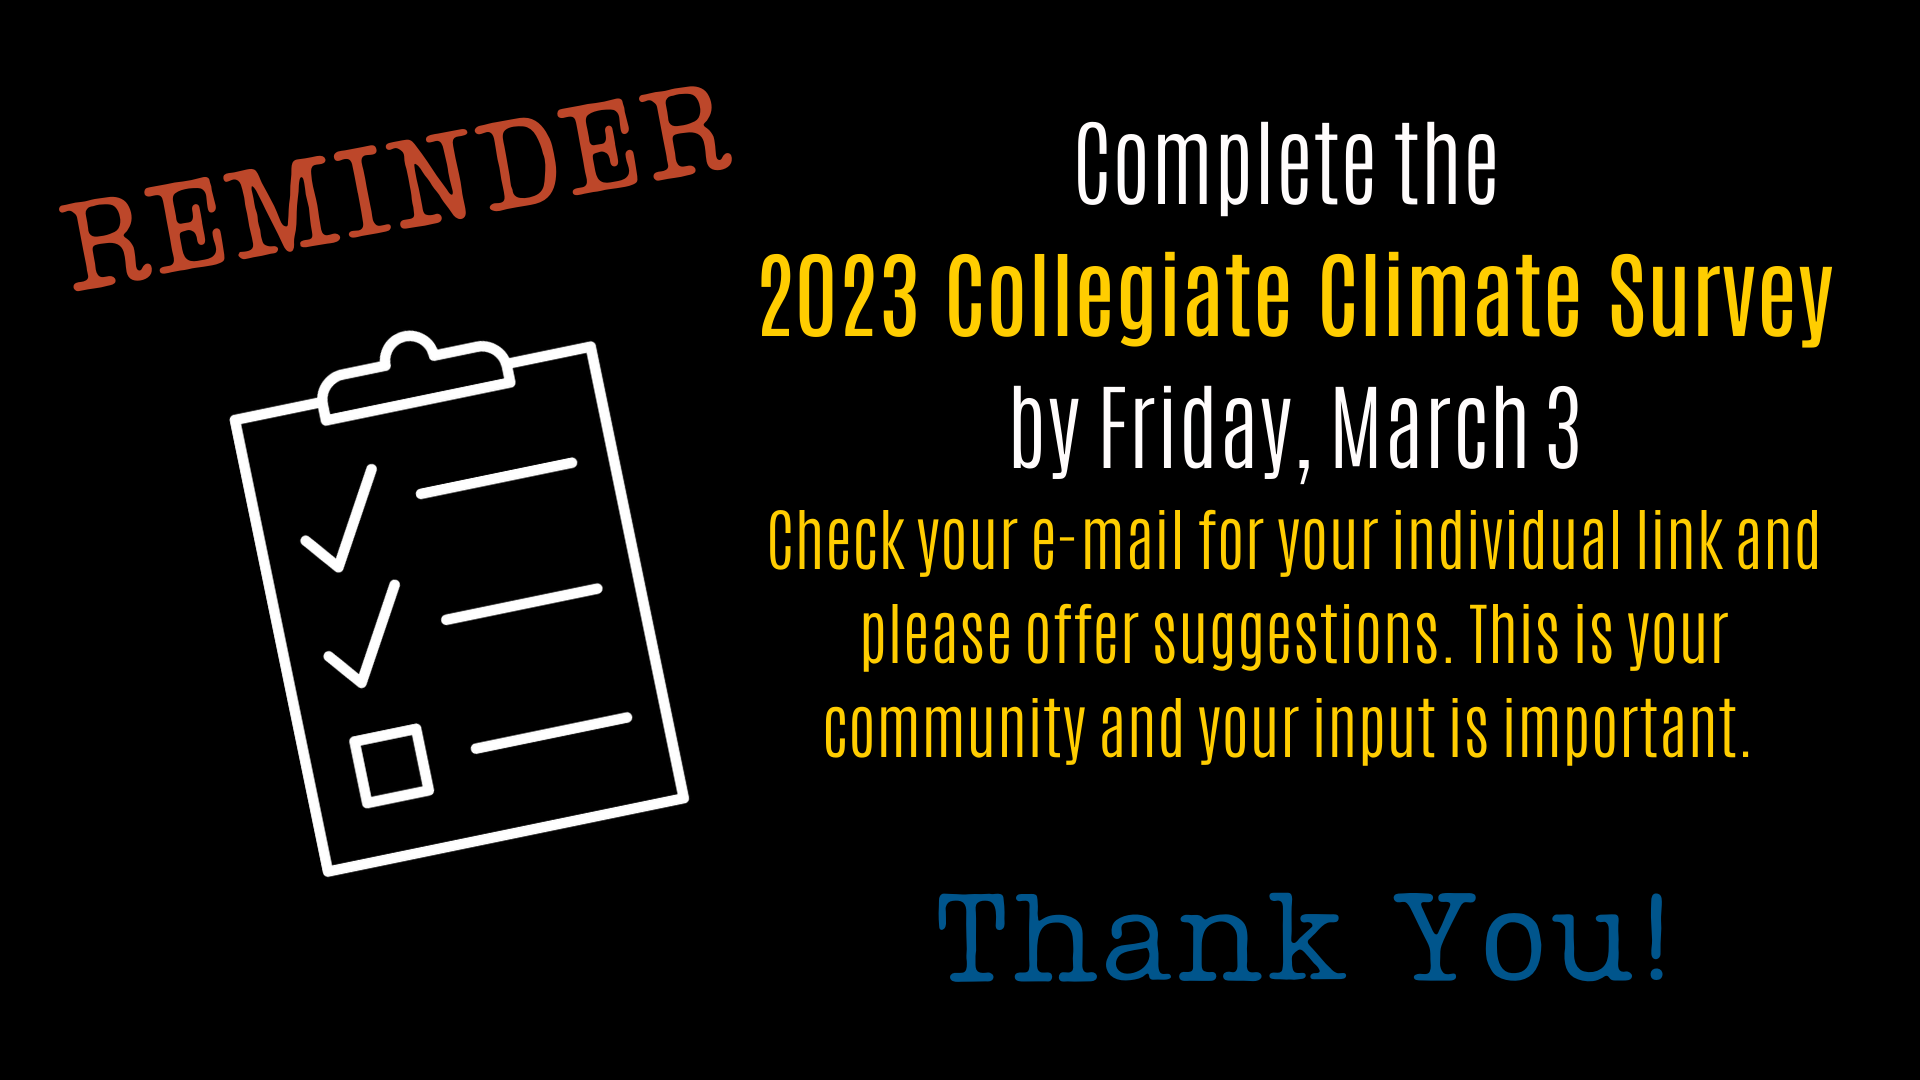 REMINDER: Complete the  2023 Collegiate Climate Survey by Friday, March 3 Check your e-mail for your individual link and please offer suggestions. This is your community and your input is important. Thank You!